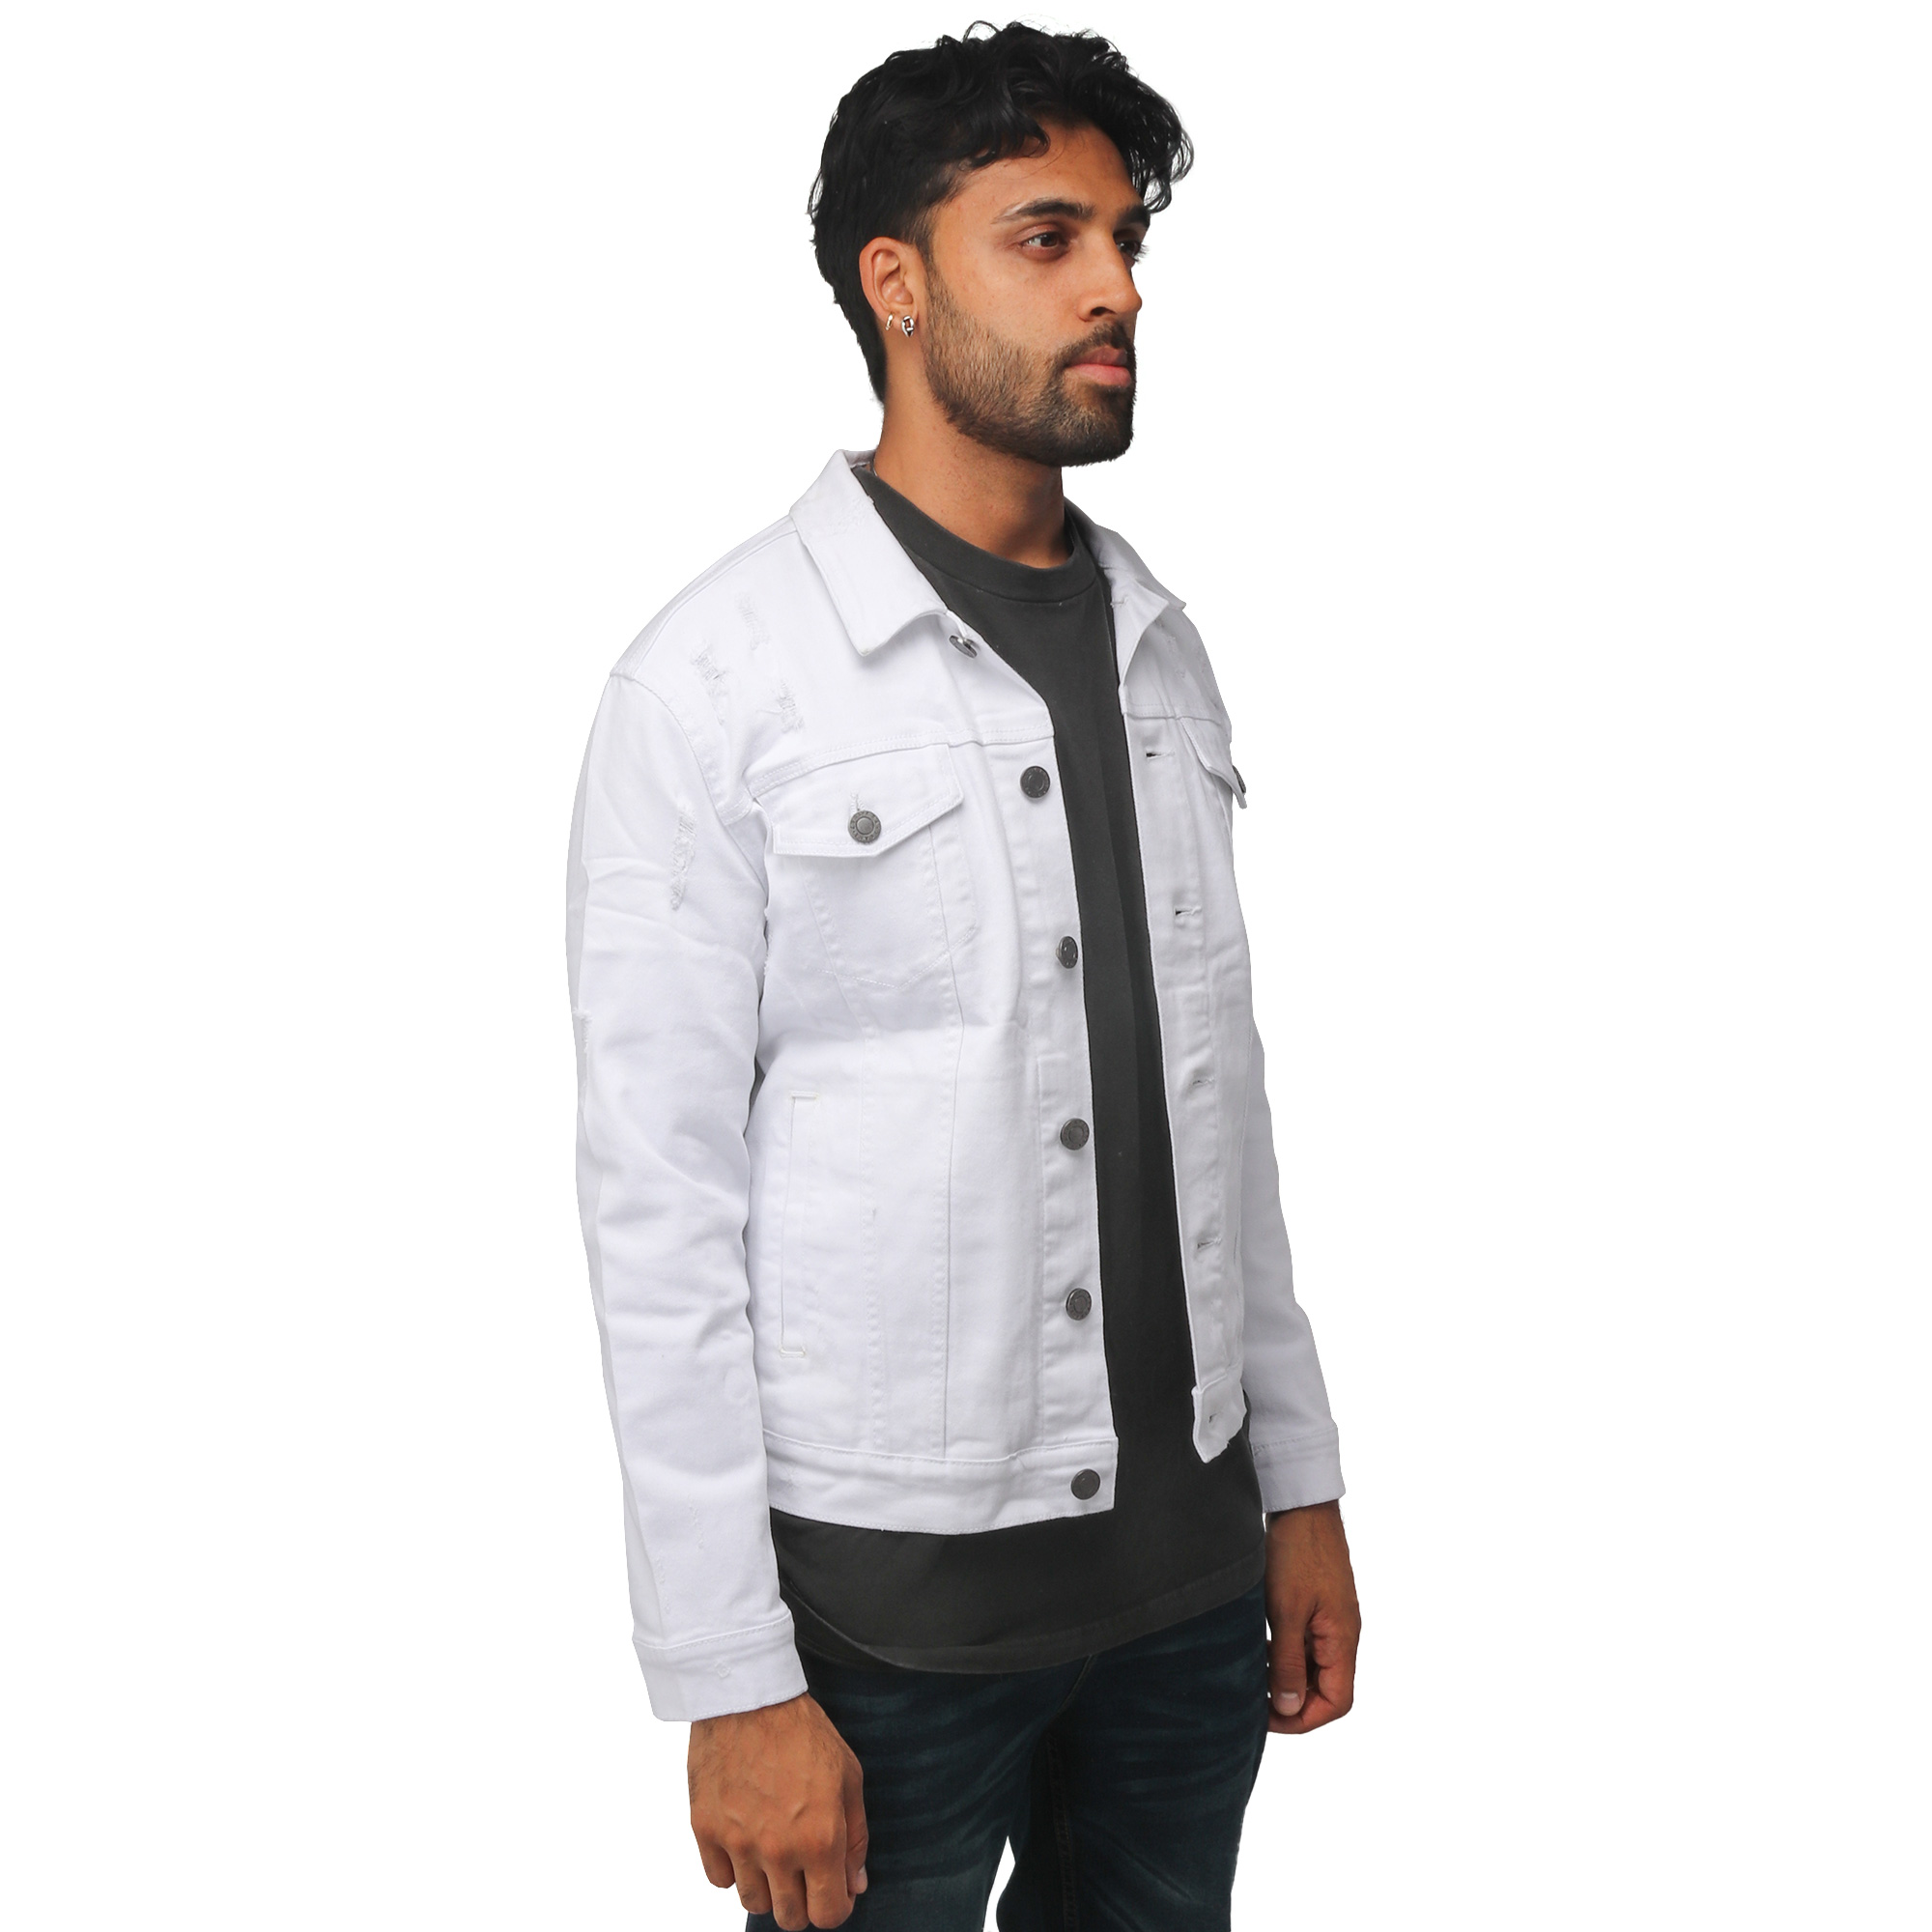 X RAY Men's Denim Jacket, Washed Ripped Distressed Flex Stretch Casual Trucker Biker Jean Jacket, White - Ripped, Small - image 2 of 9